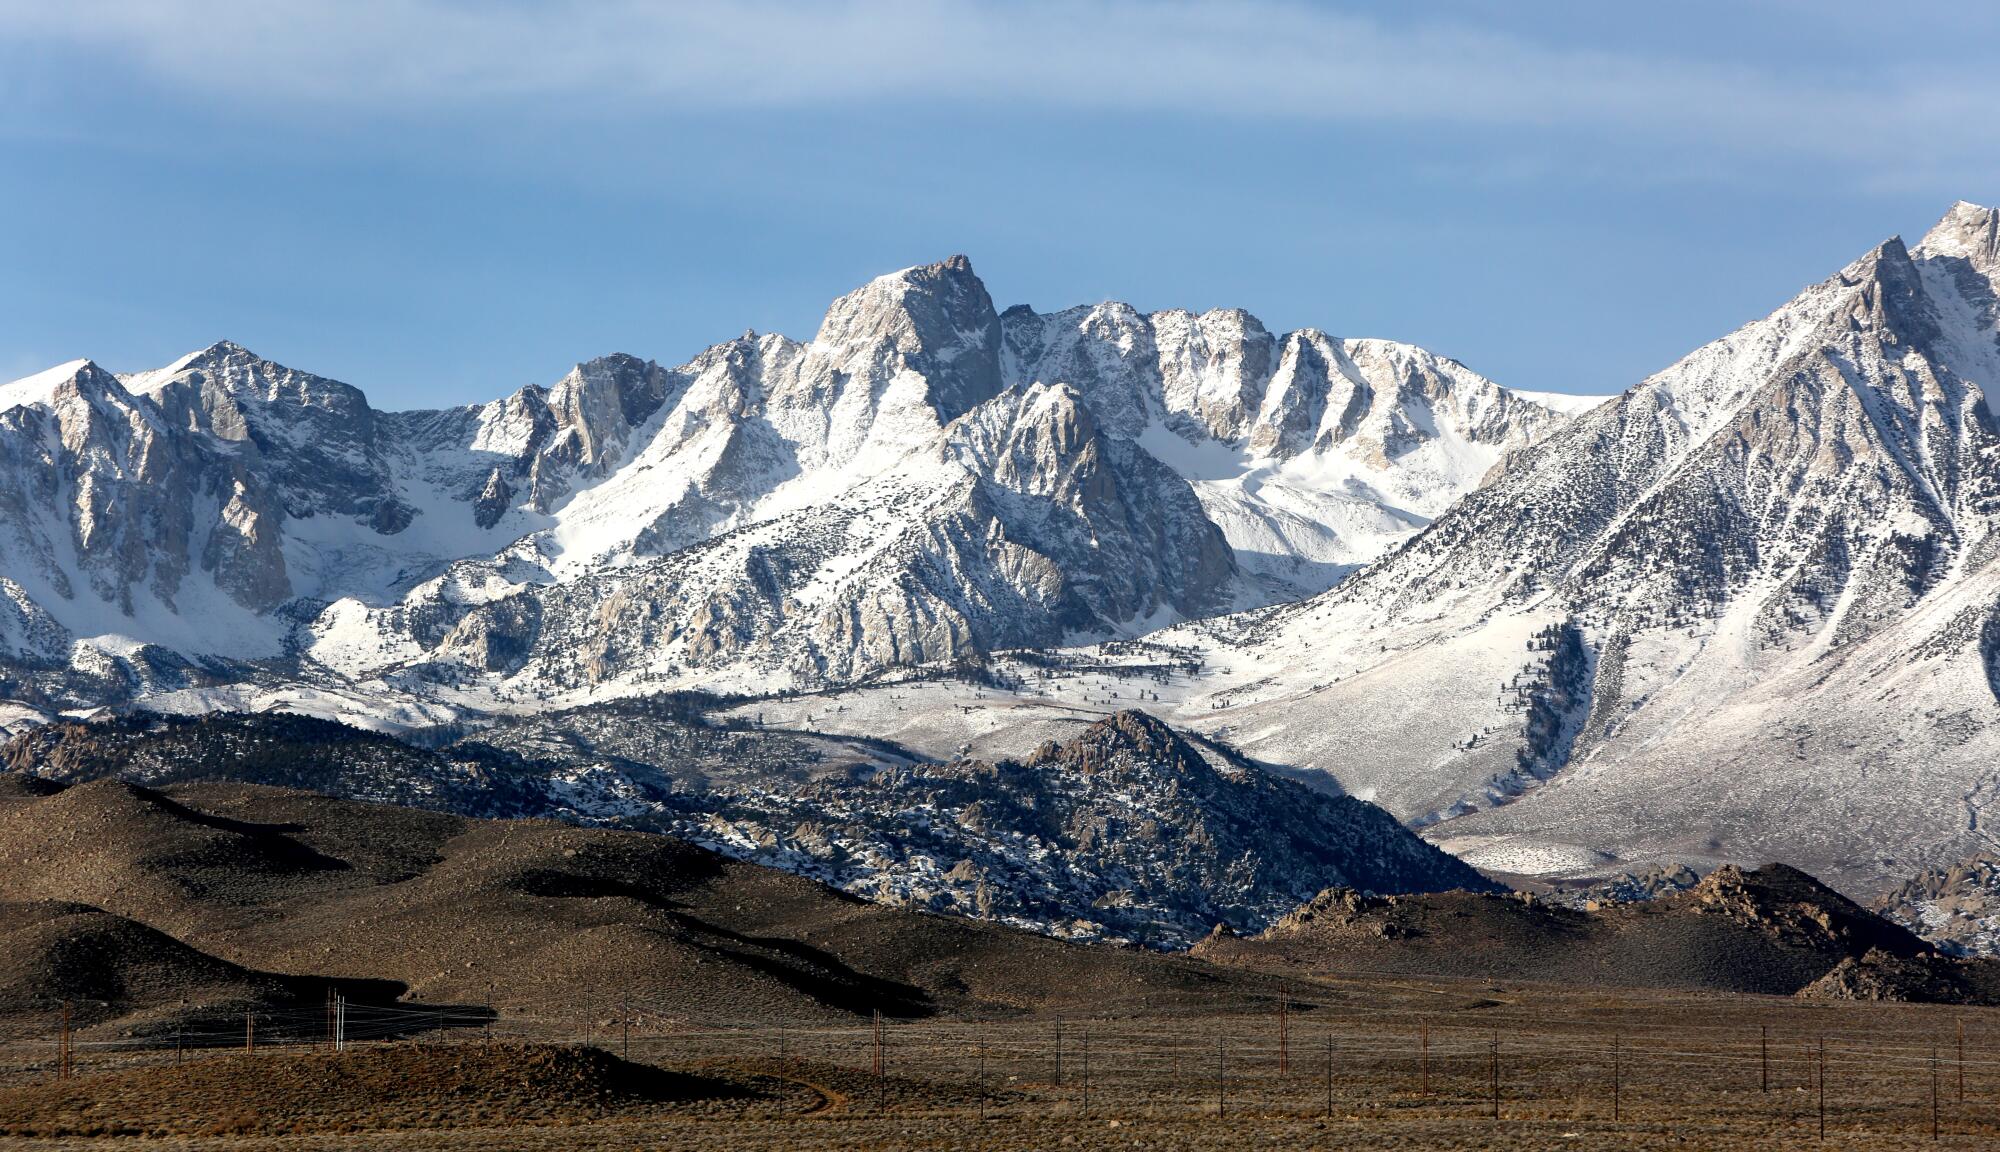 A view of the snowy Eastern Sierra 